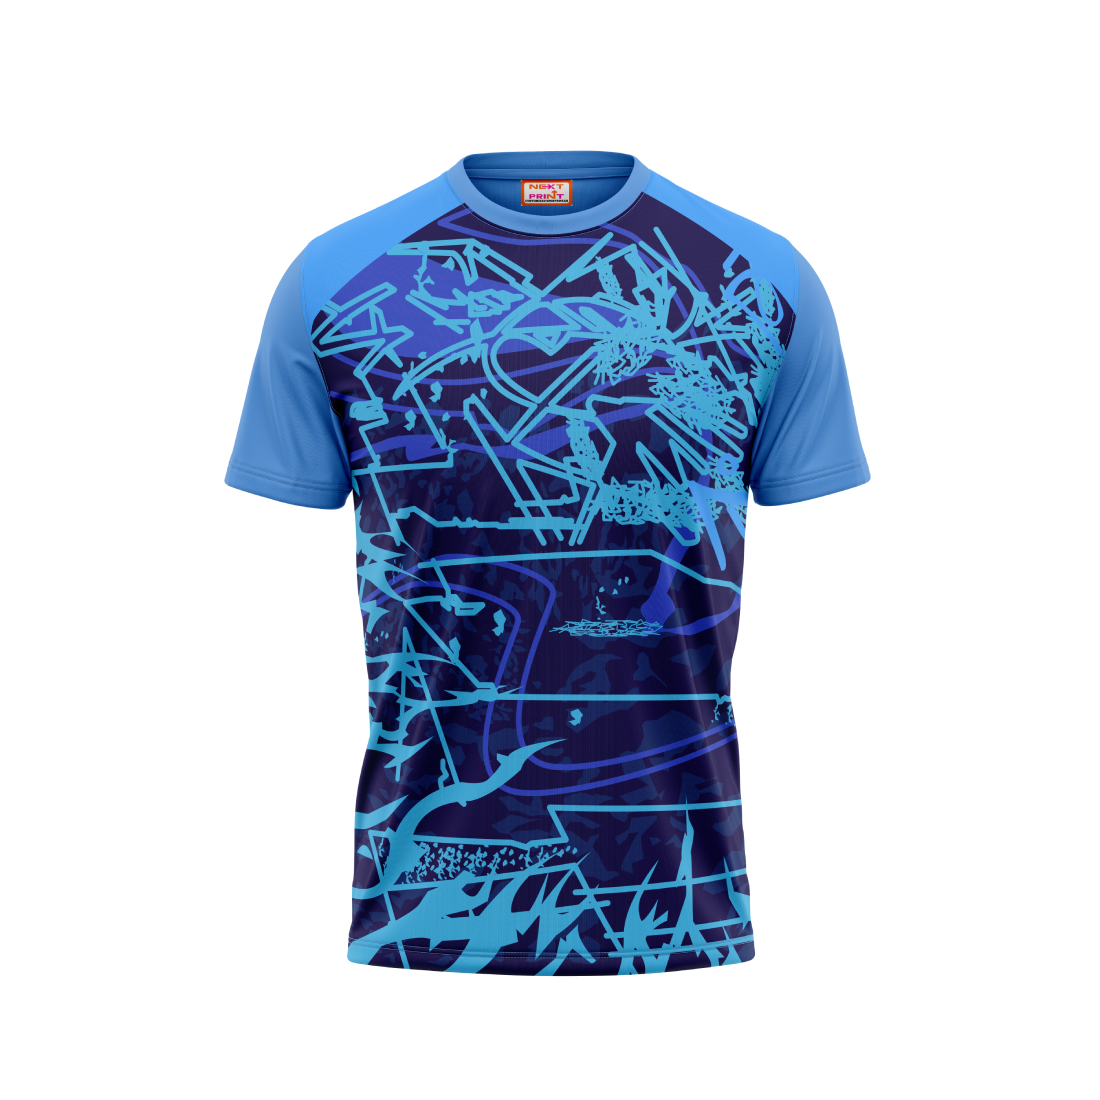 Round Neck Printed Jersey Skyblue NP50000159